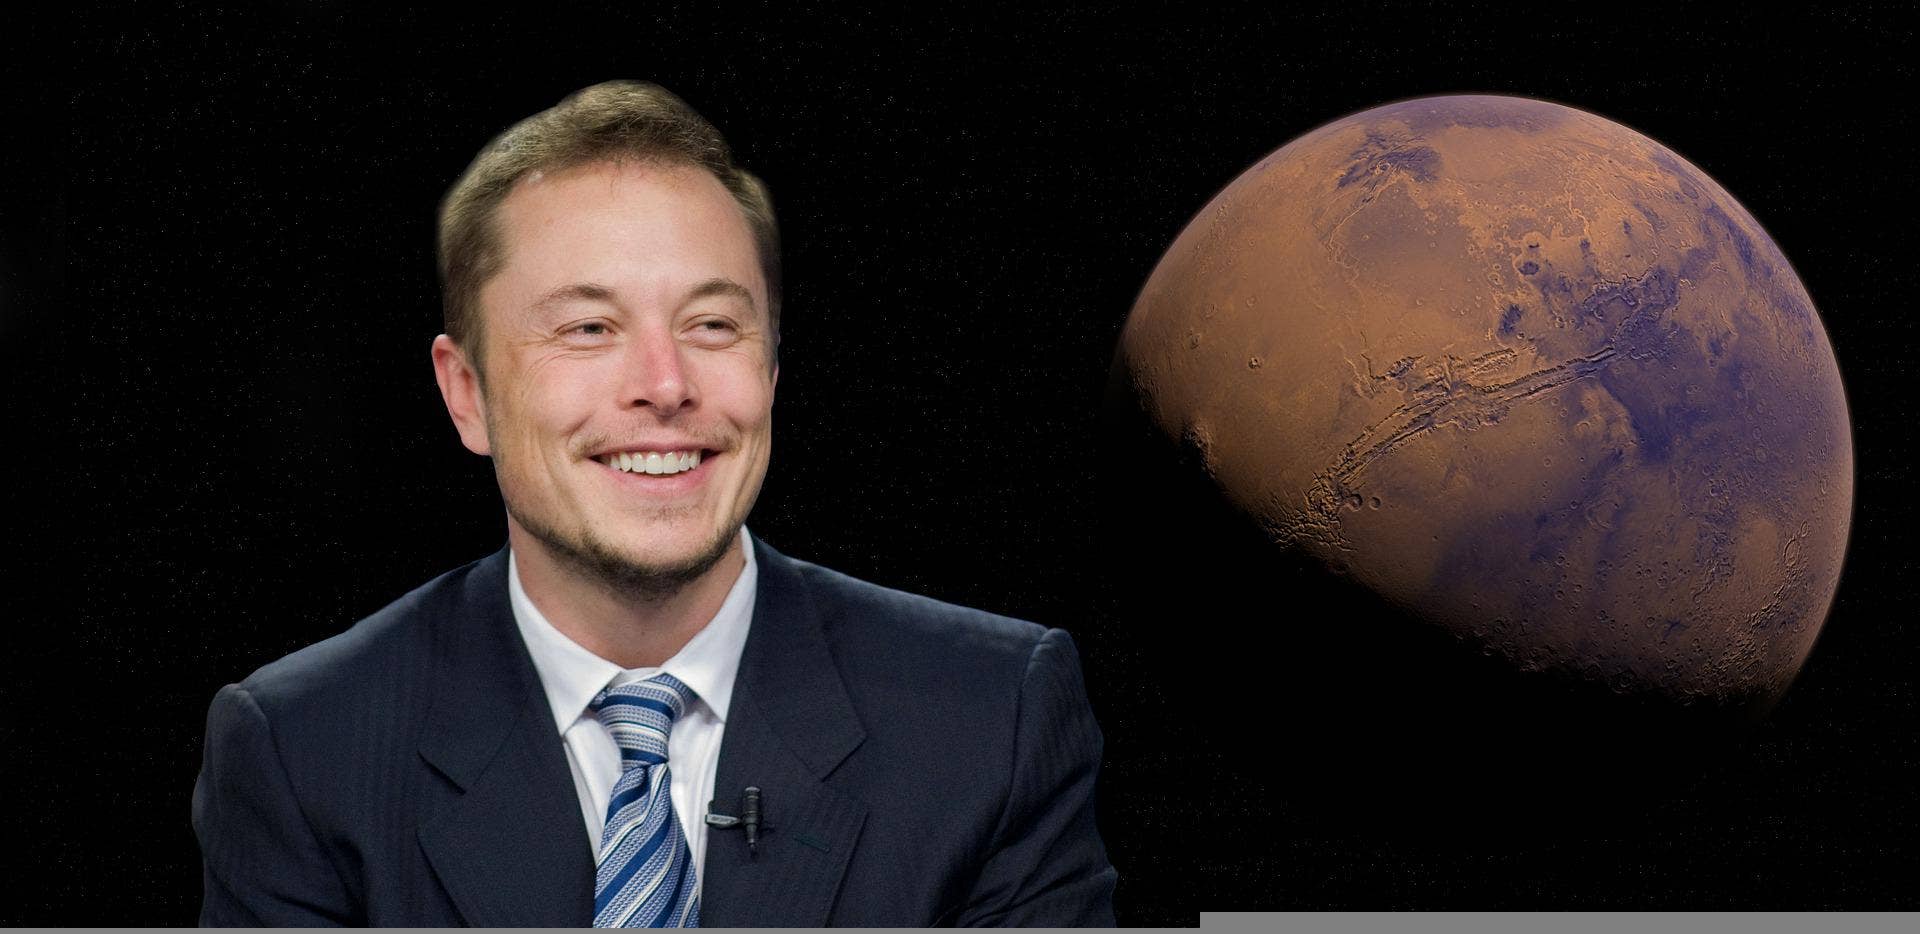 Does Elon Musk Believe In Aliens? Here's What He Said And How It Would Impact SpaceX